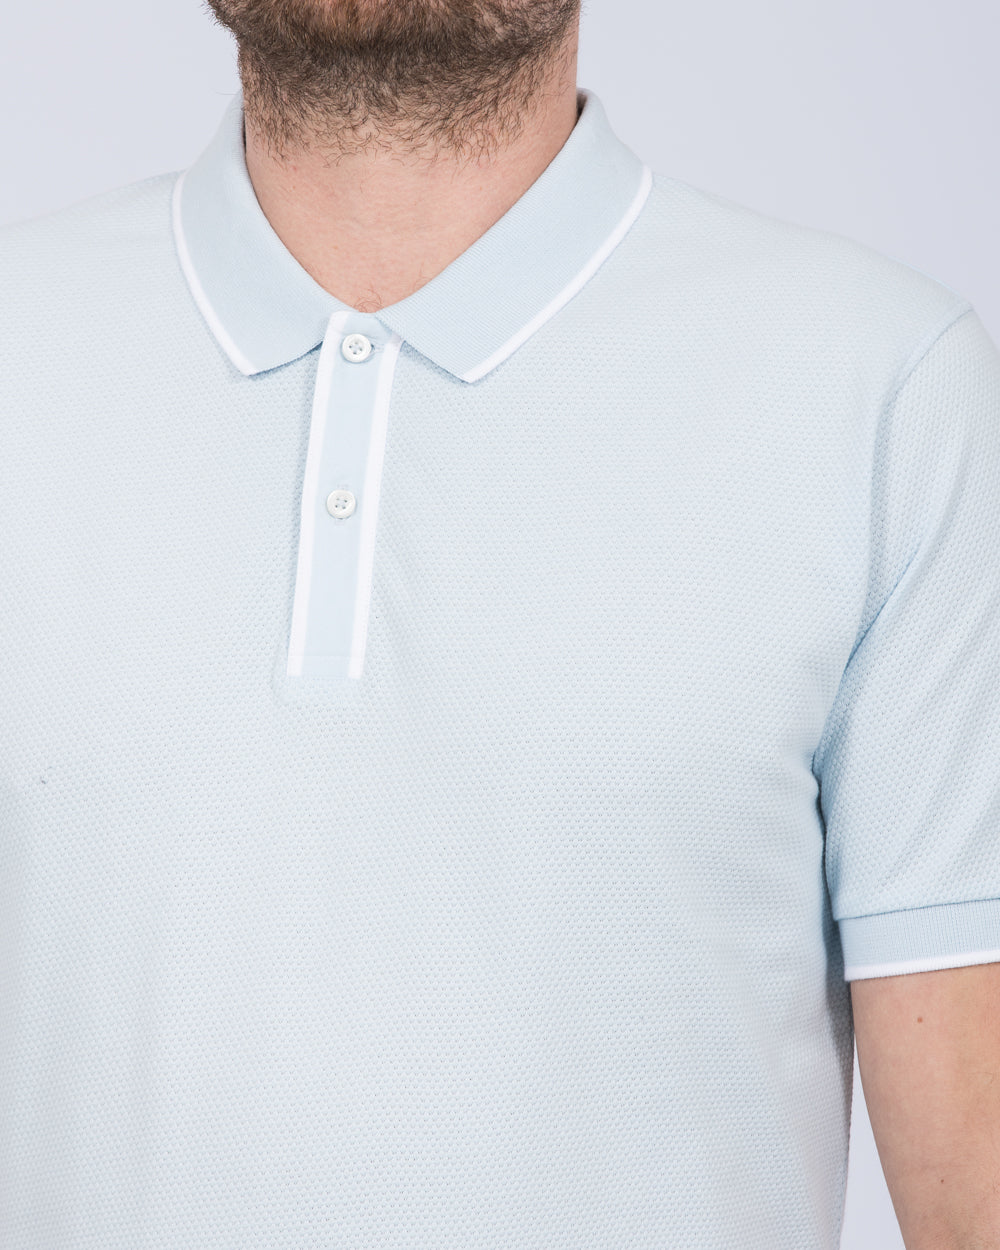 2t Slim Fit Tall Tipped Polo Shirt (ice blue)